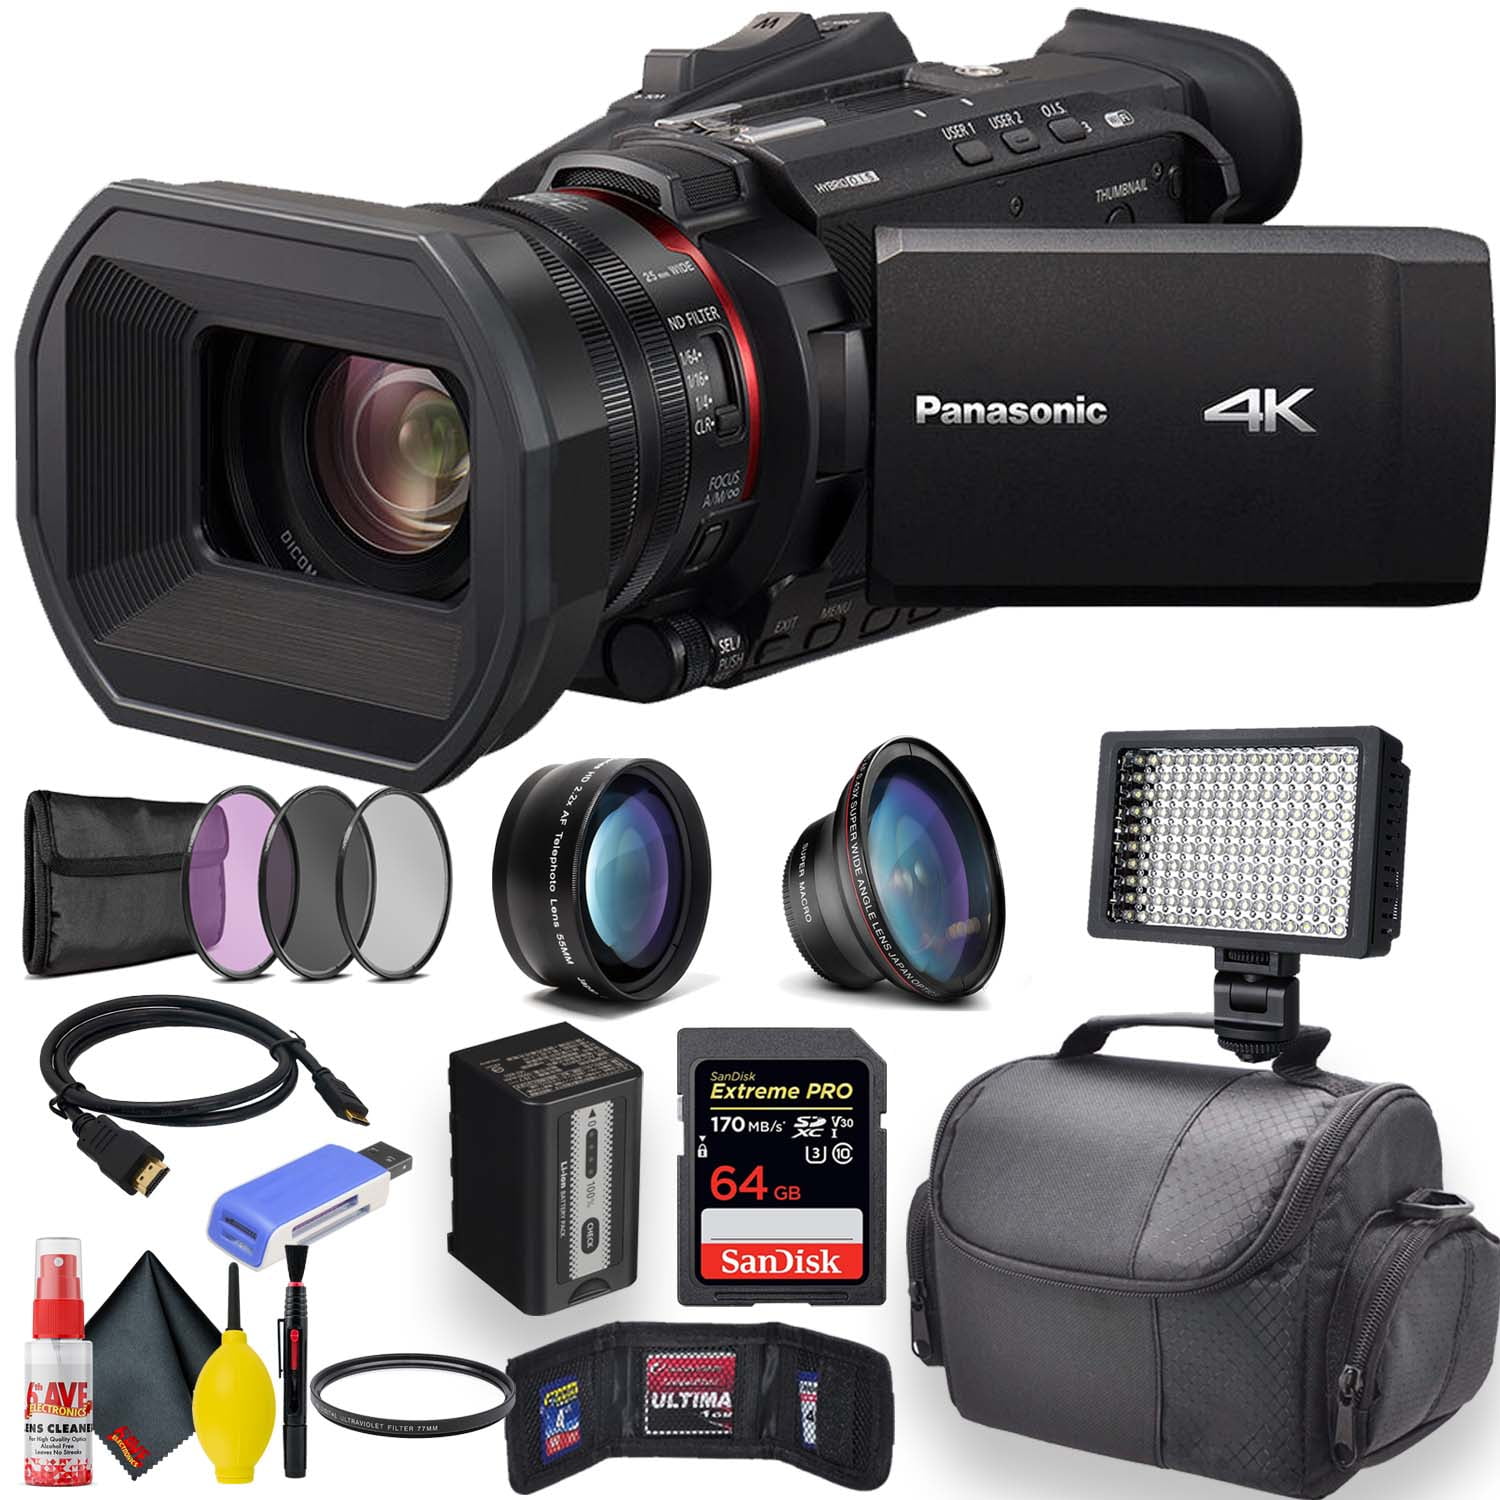 Gedateerd sector slaap Panasonic HC-X1500 4K Professional Camcorder with 24x Optical Zoom, WiFi HD  Live Streaming W/ UV and HD Filter Kit + Soft Case + Sandisk Extreme Pro  64GB Card + LED Light +